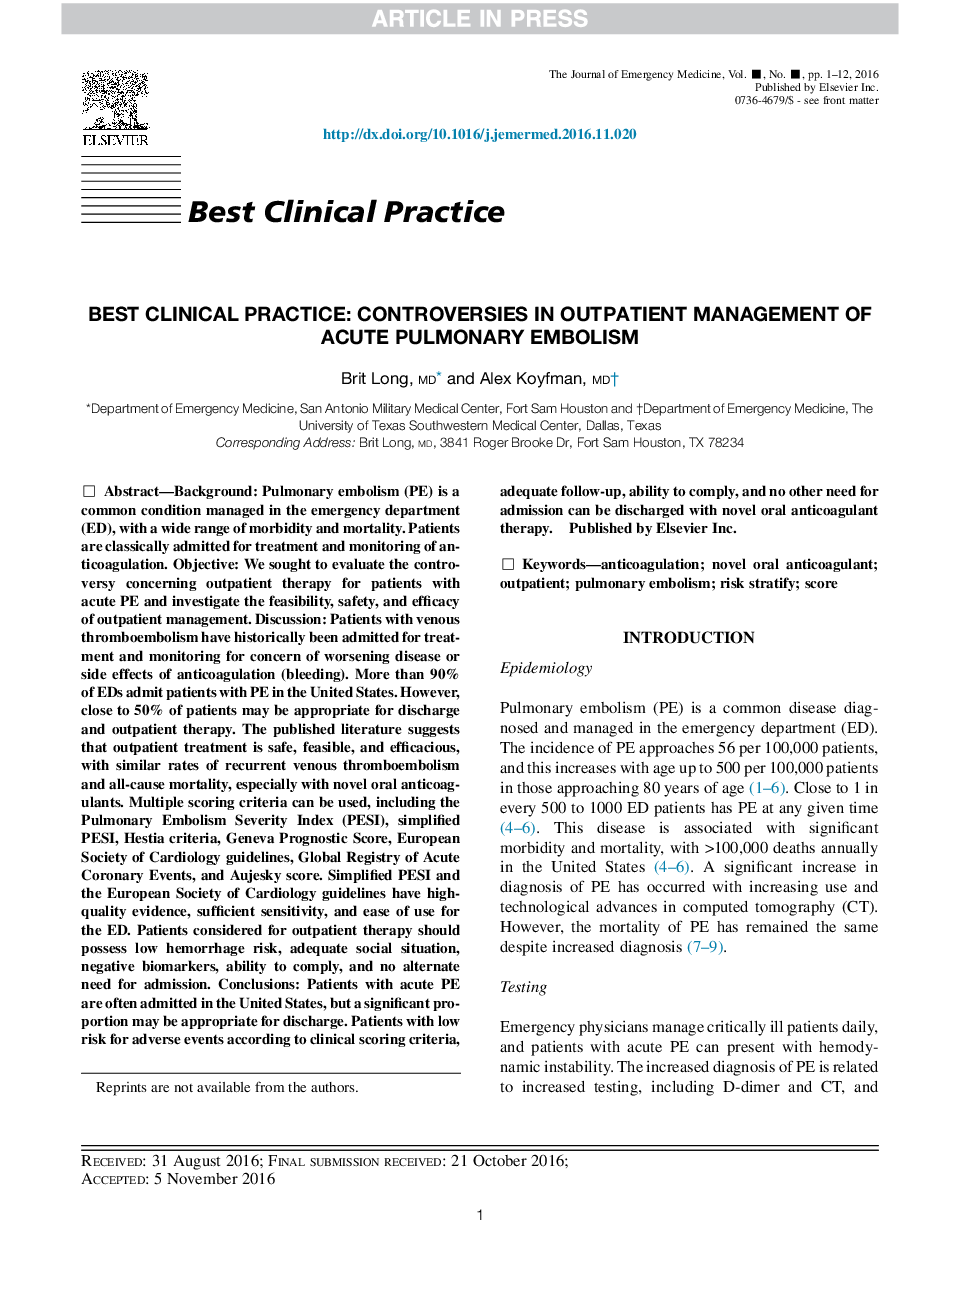 Best Clinical Practice: Controversies in Outpatient Management of Acute Pulmonary Embolism